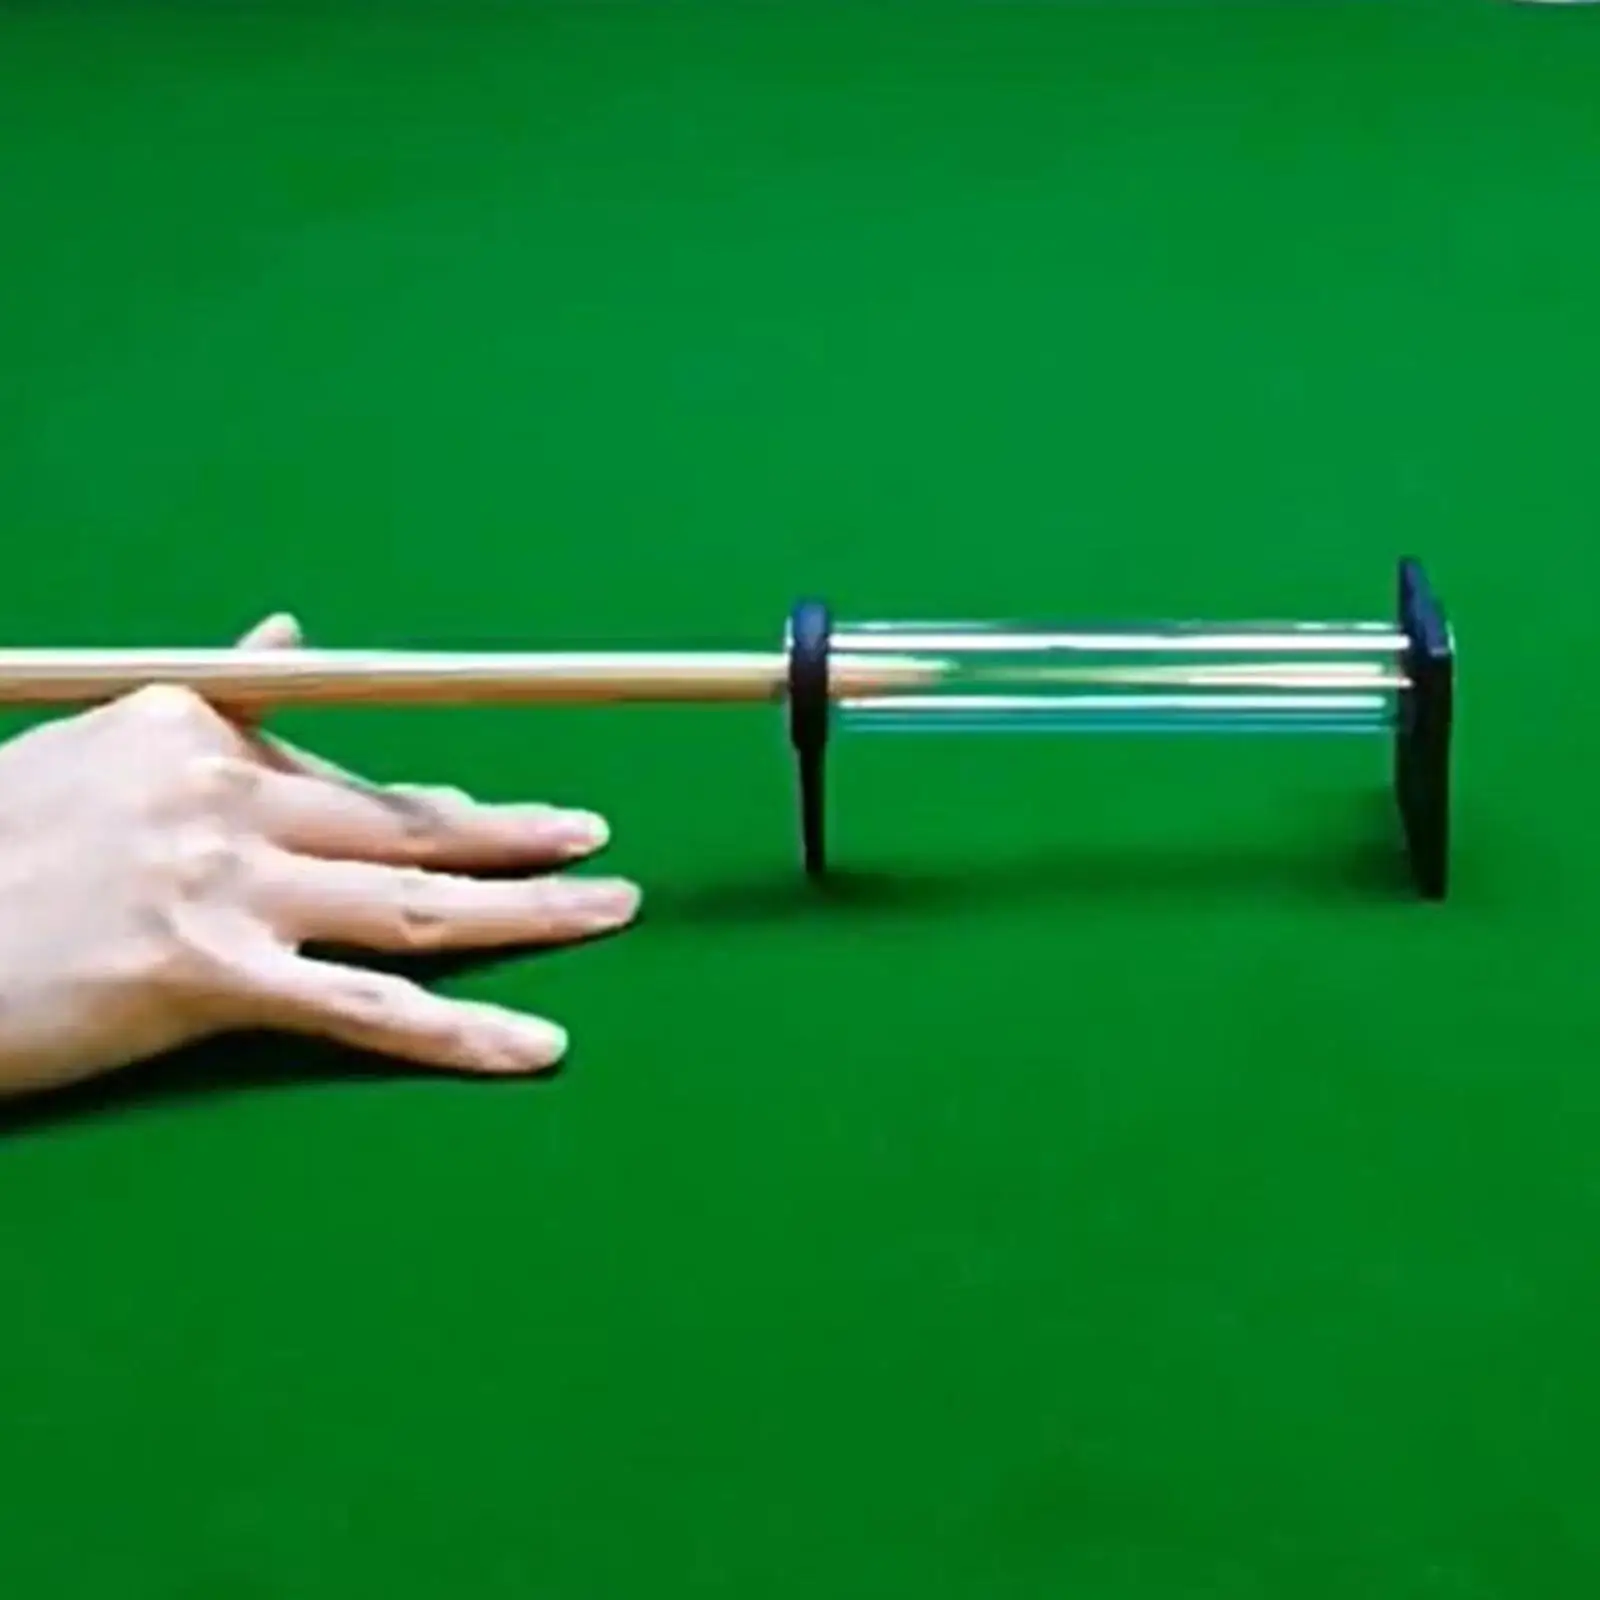 Snooker Aiming Training Accessories Adjustable Pool Stroke Trainer